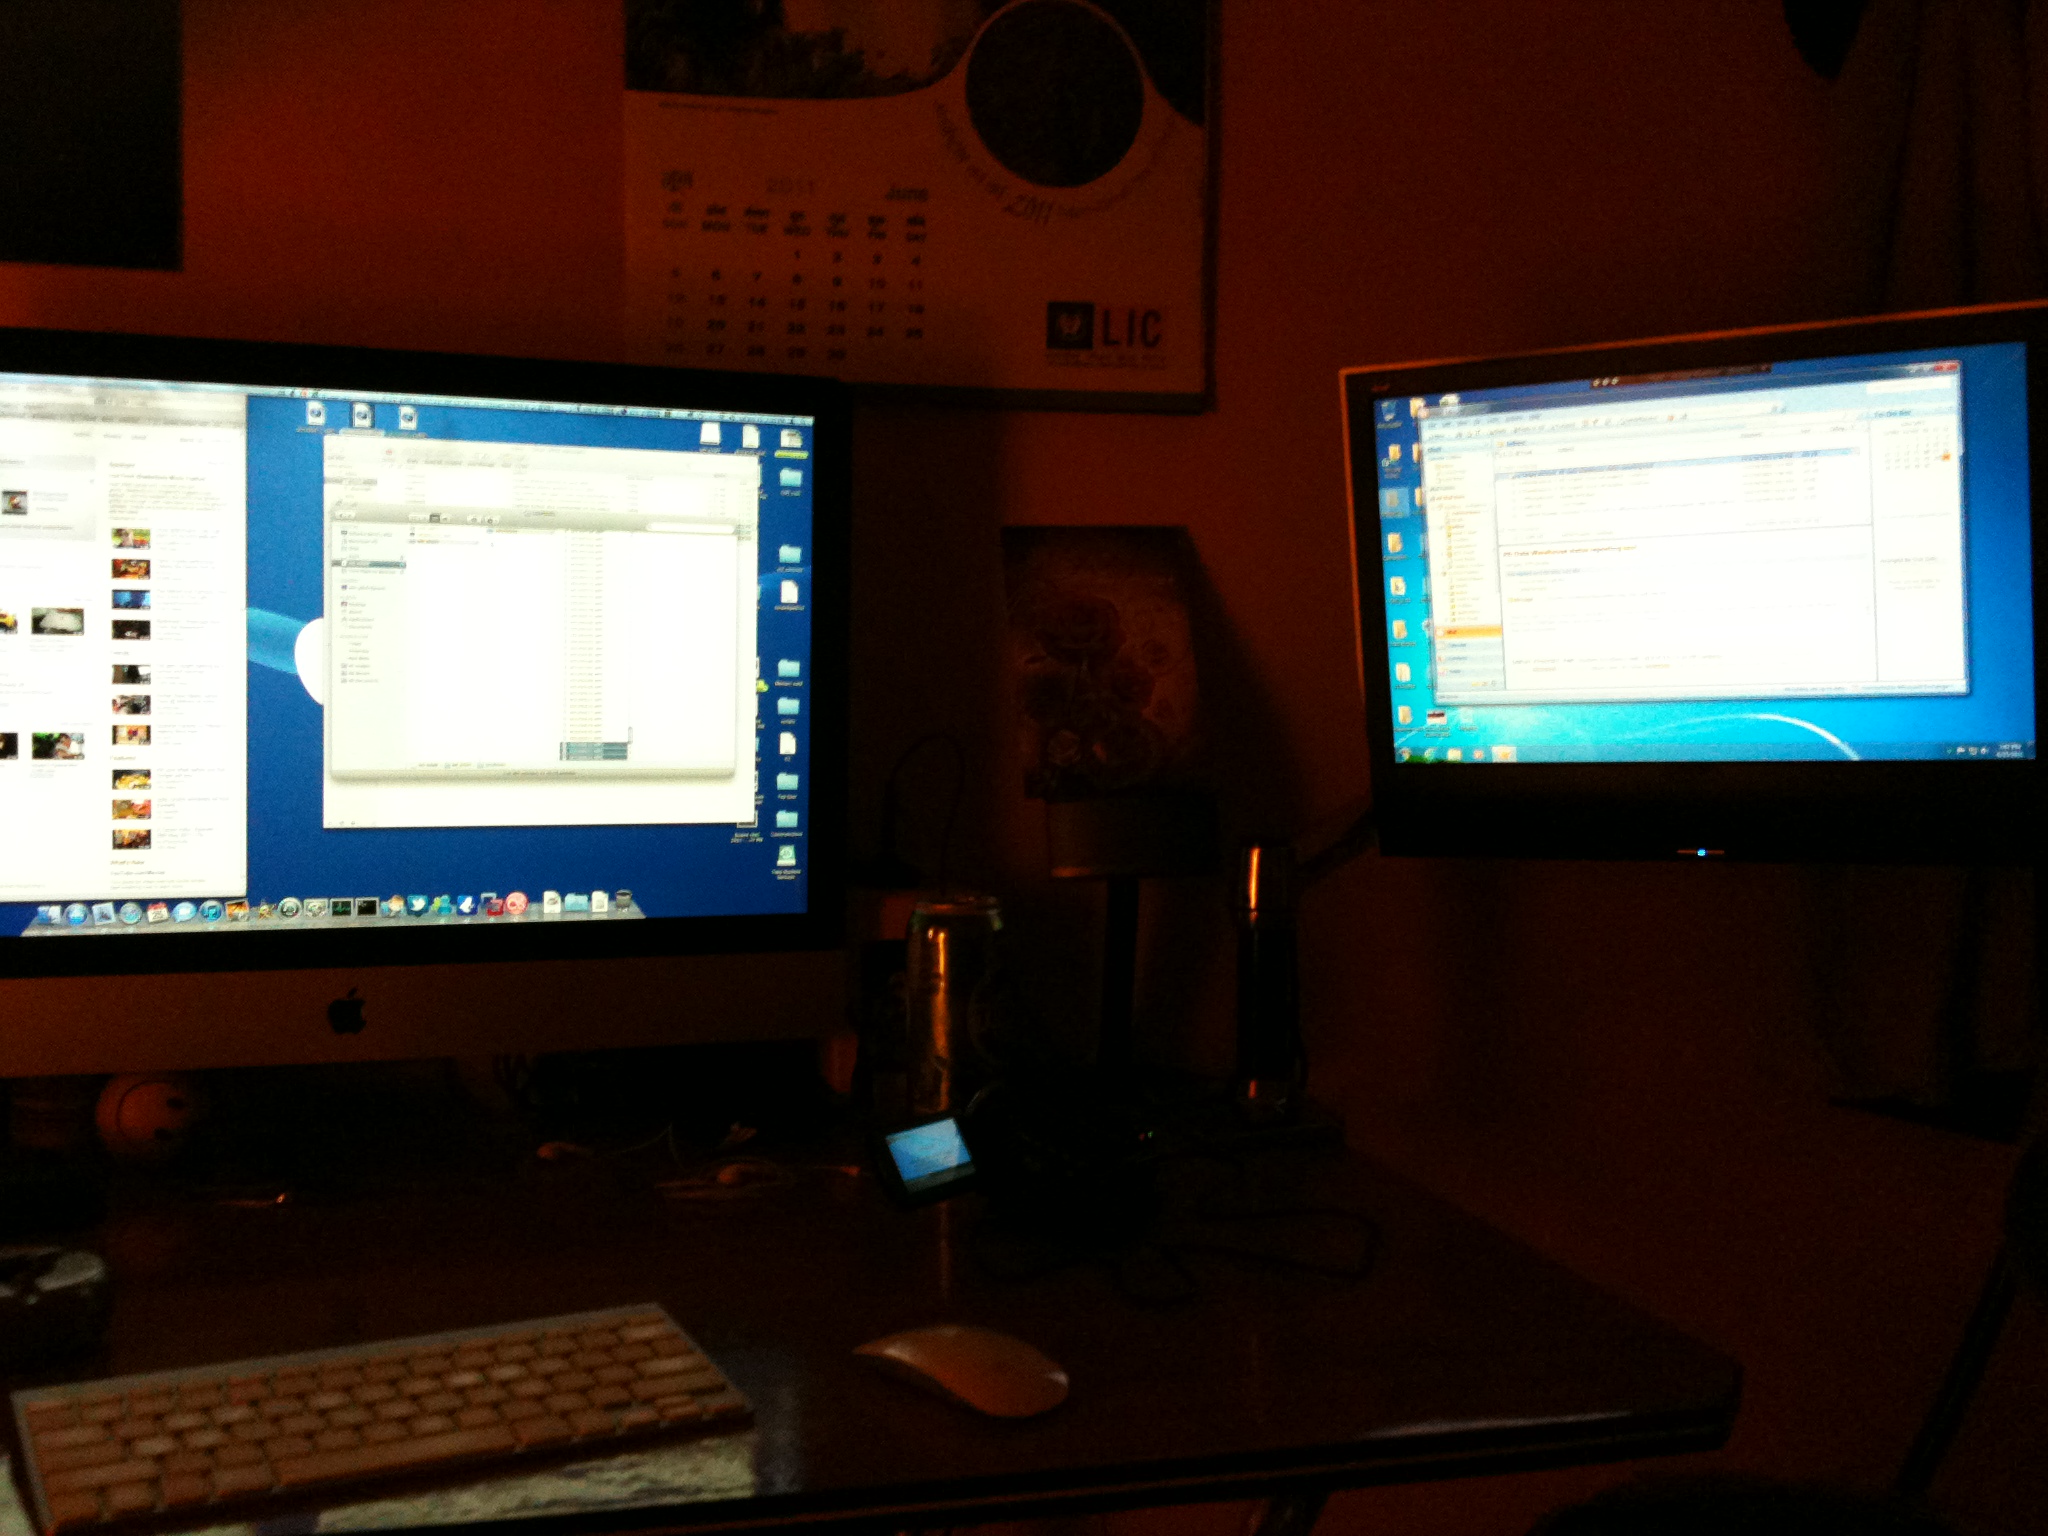 Mac OS and Windows running together on my iMac